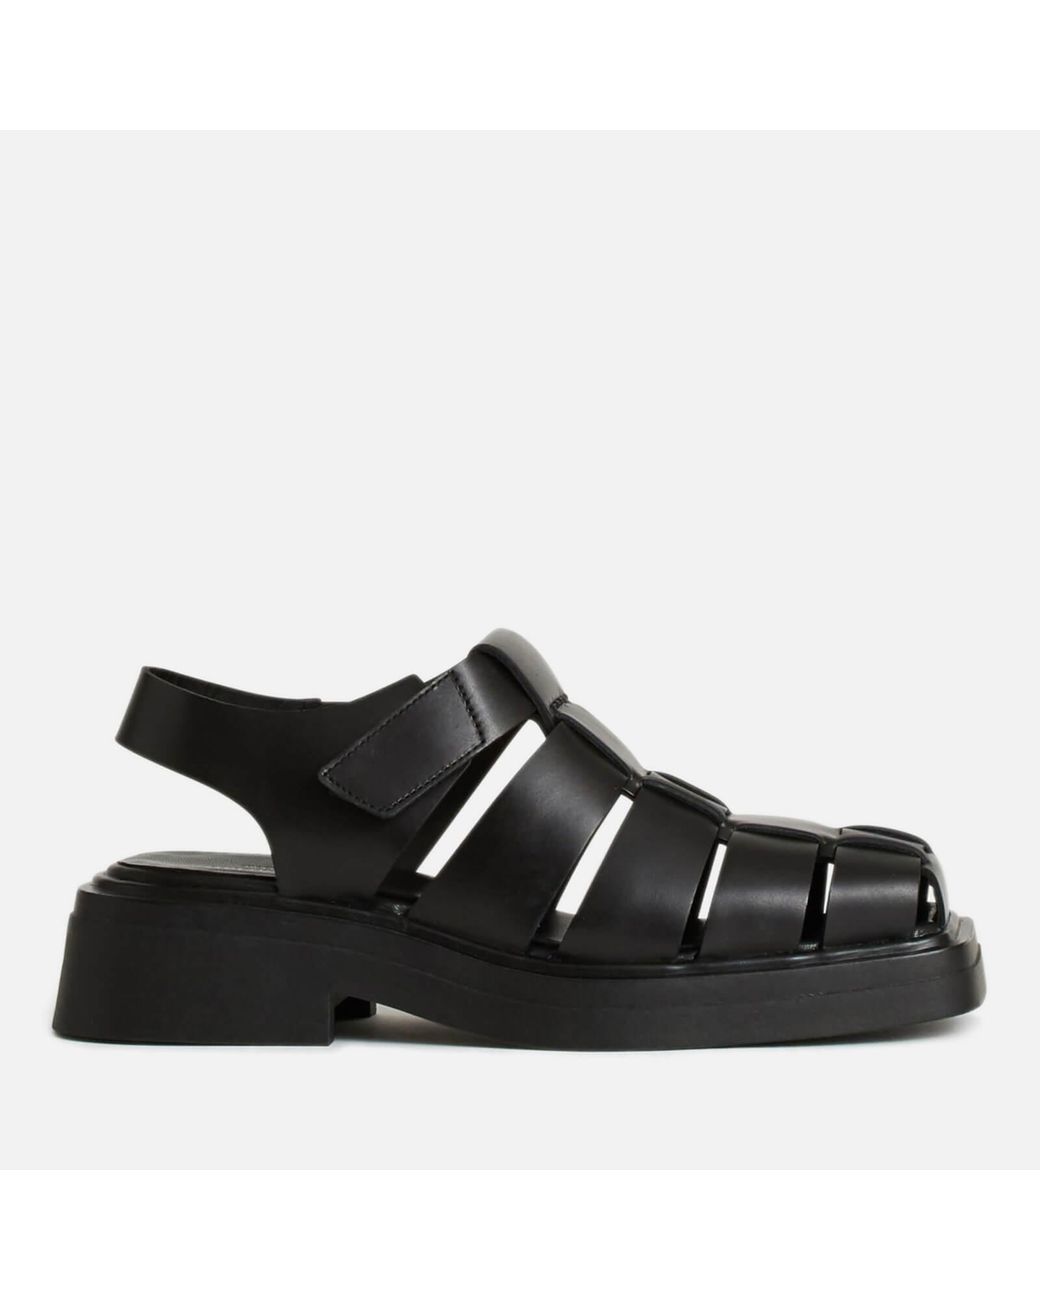 Vagabond Shoemakers Eyra Leather Sandals in Black